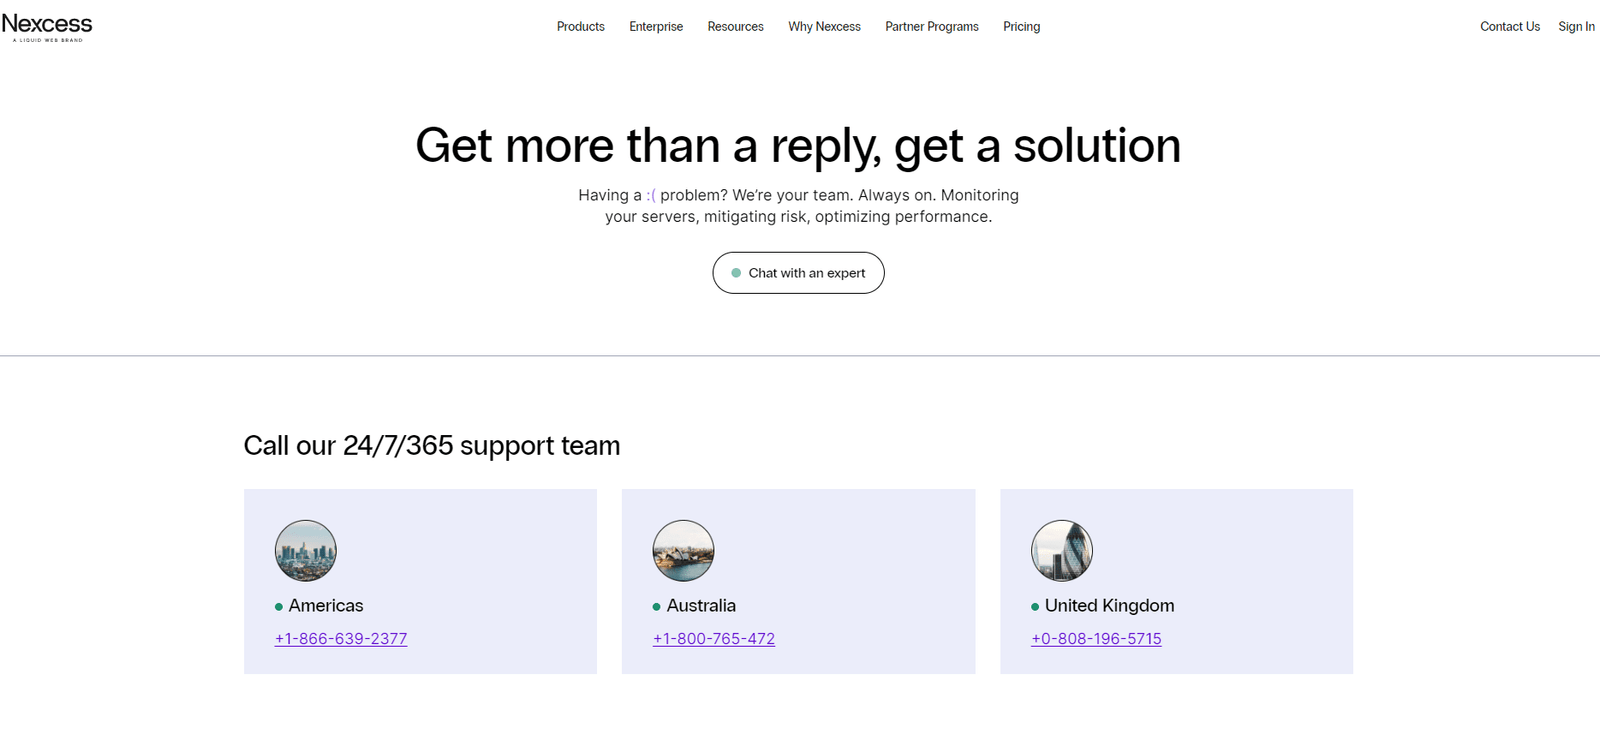 24/7/365 support available from Nexcess.